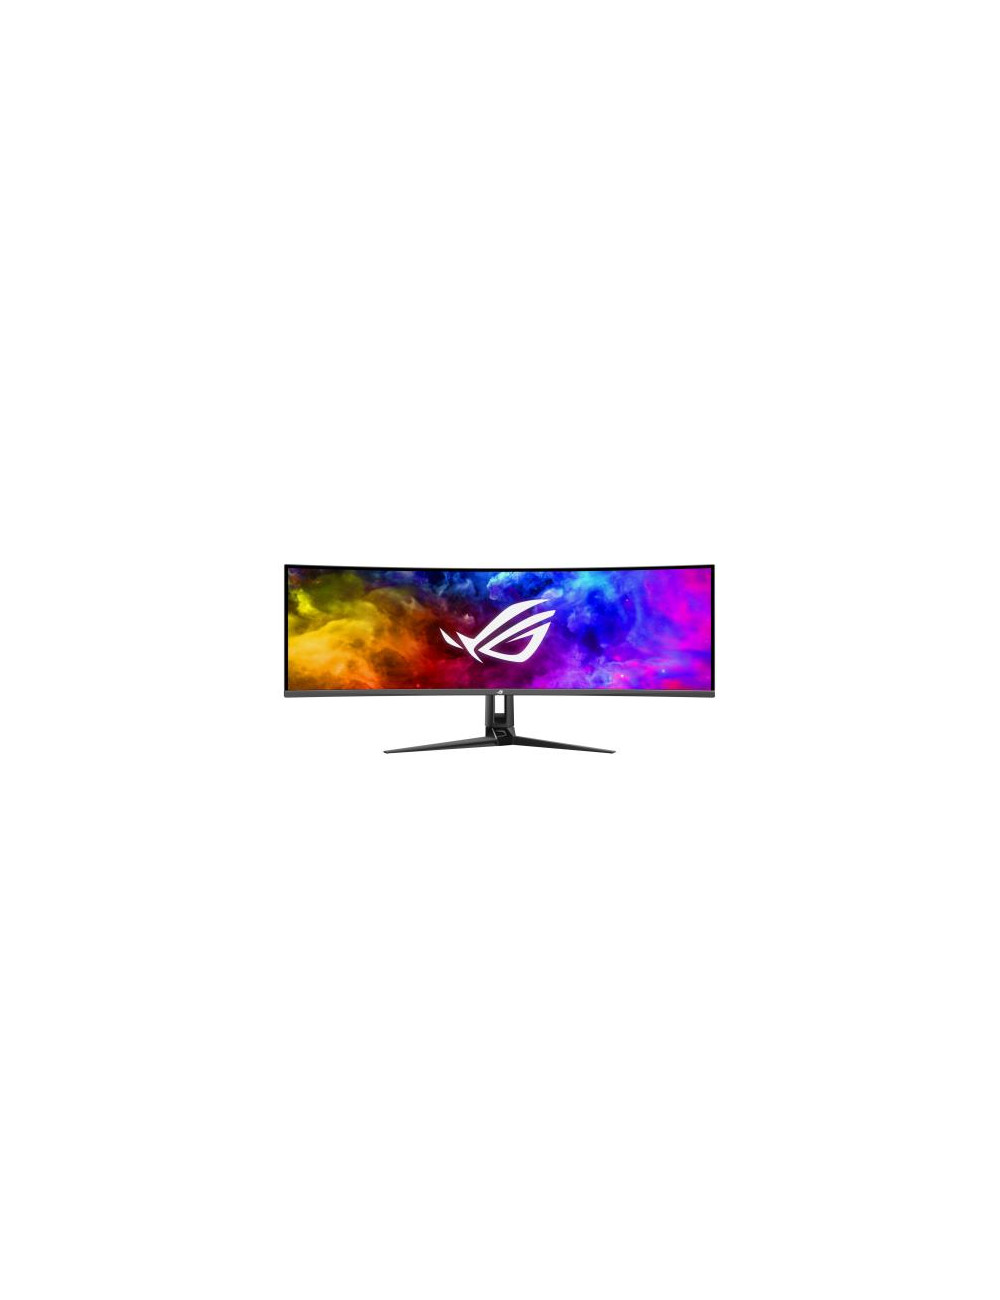 LCD Monitor|ASUS|PG49WCD|49"|Gaming/Curved|Panel OLED|5120x1440|32:9|144Hz|Matte|0.03 ms|Swivel|Height adjustable|Tilt|Colour Bl